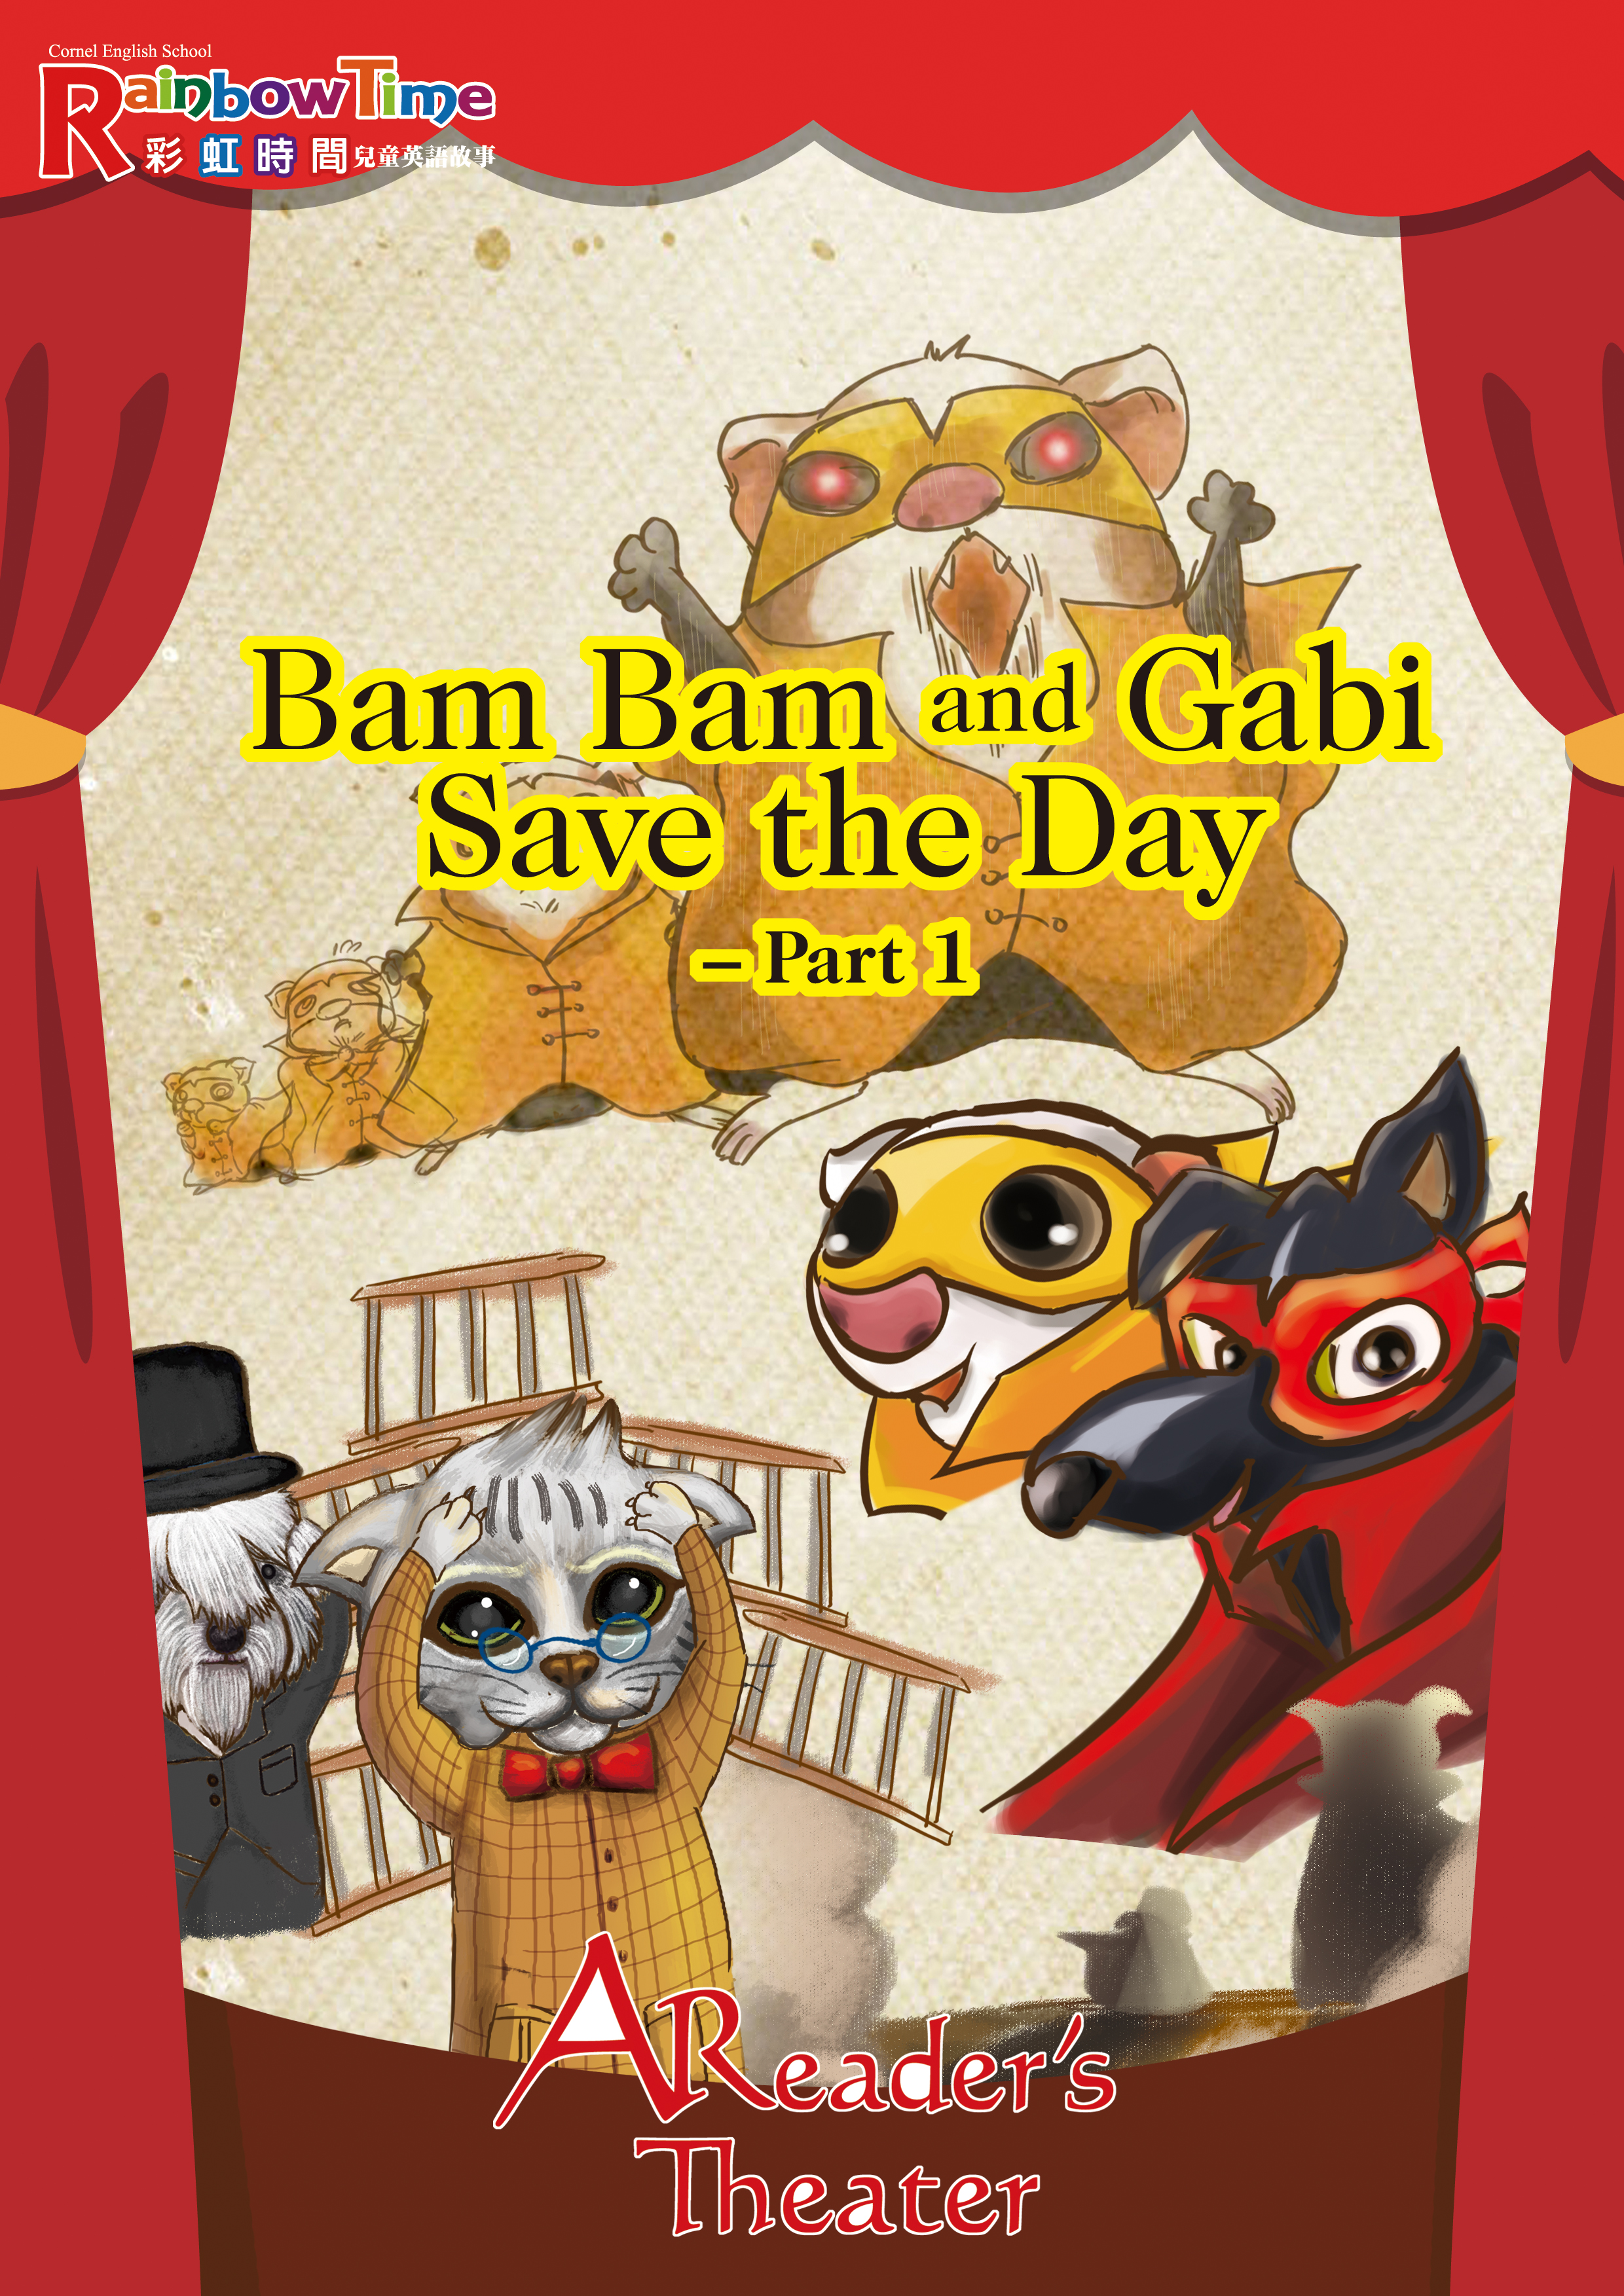 Reader's Theater: Bam Bam and Gabi Save the Day - Part 1